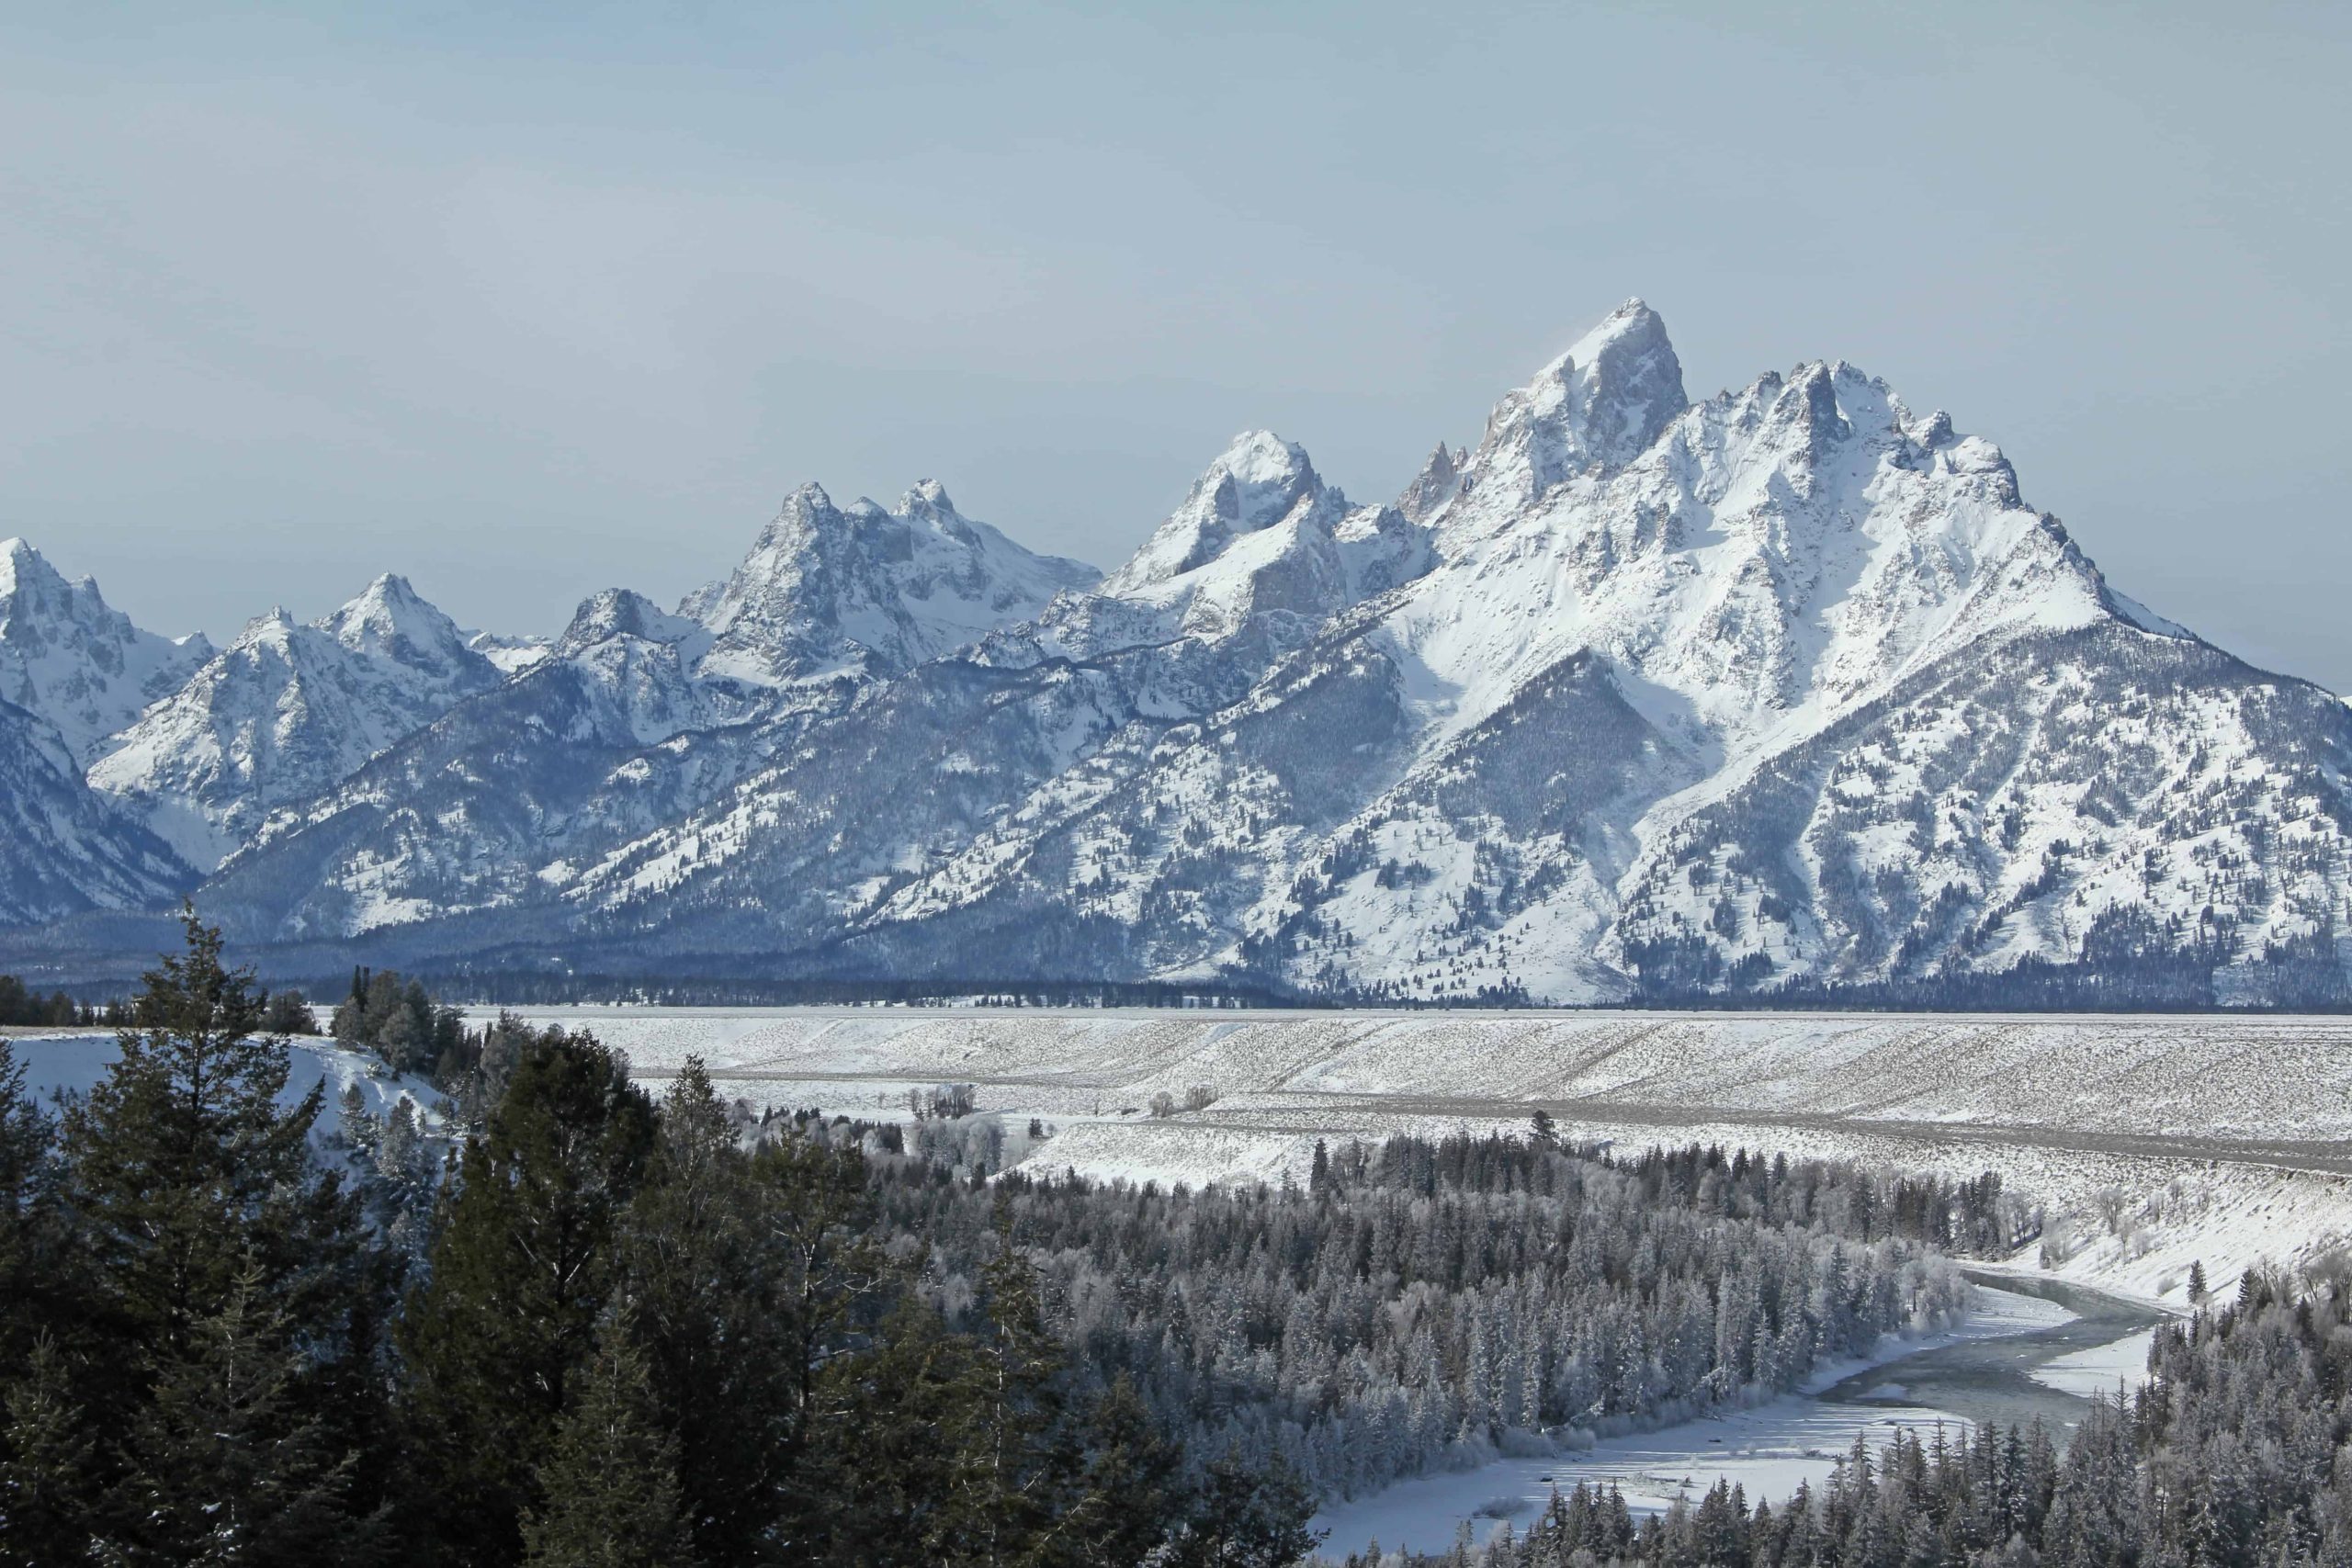  During the winter season (November to April)- best time to visit grand teton national park